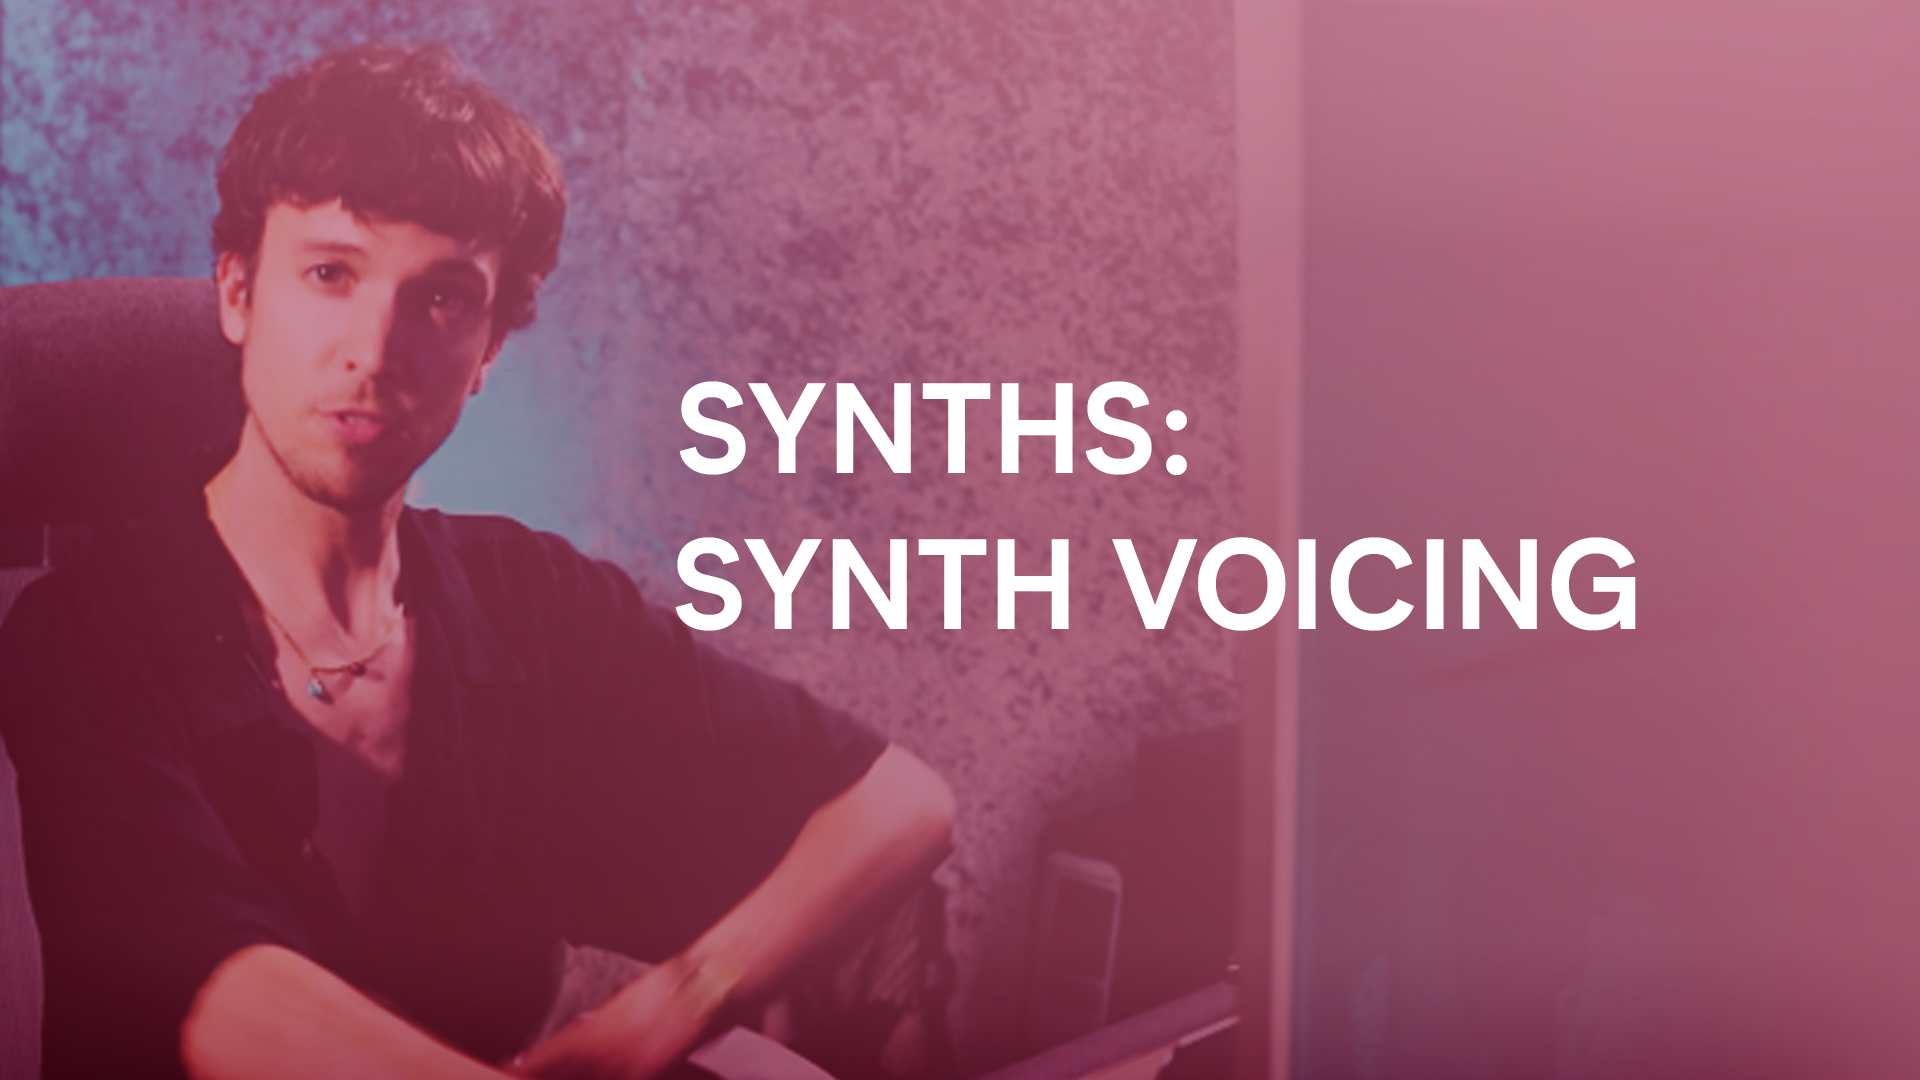 SYNTH VOICING